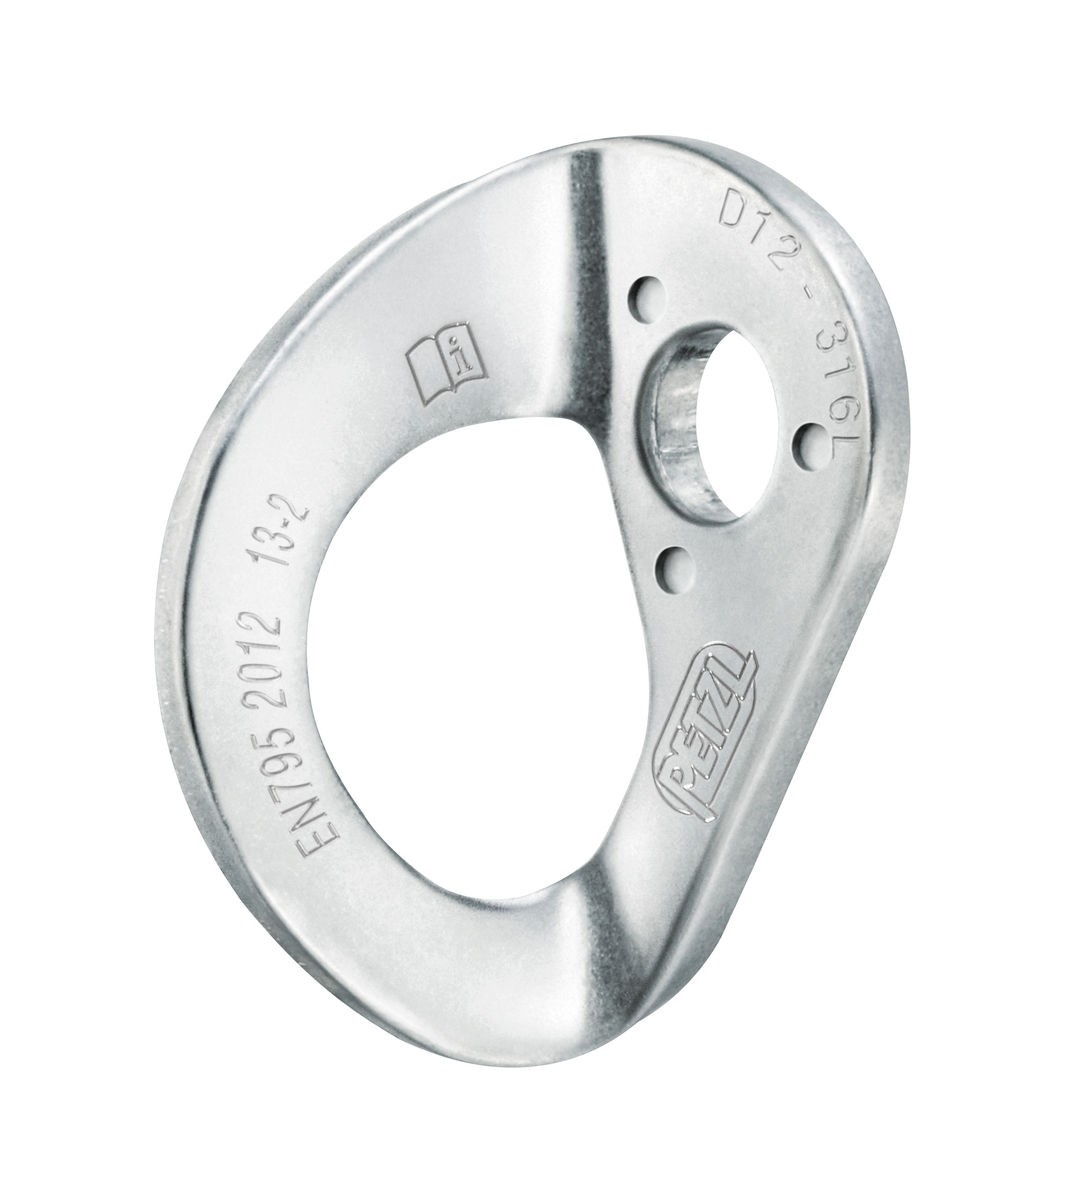 PETZL COEUR STAINLESS (P36AS??)